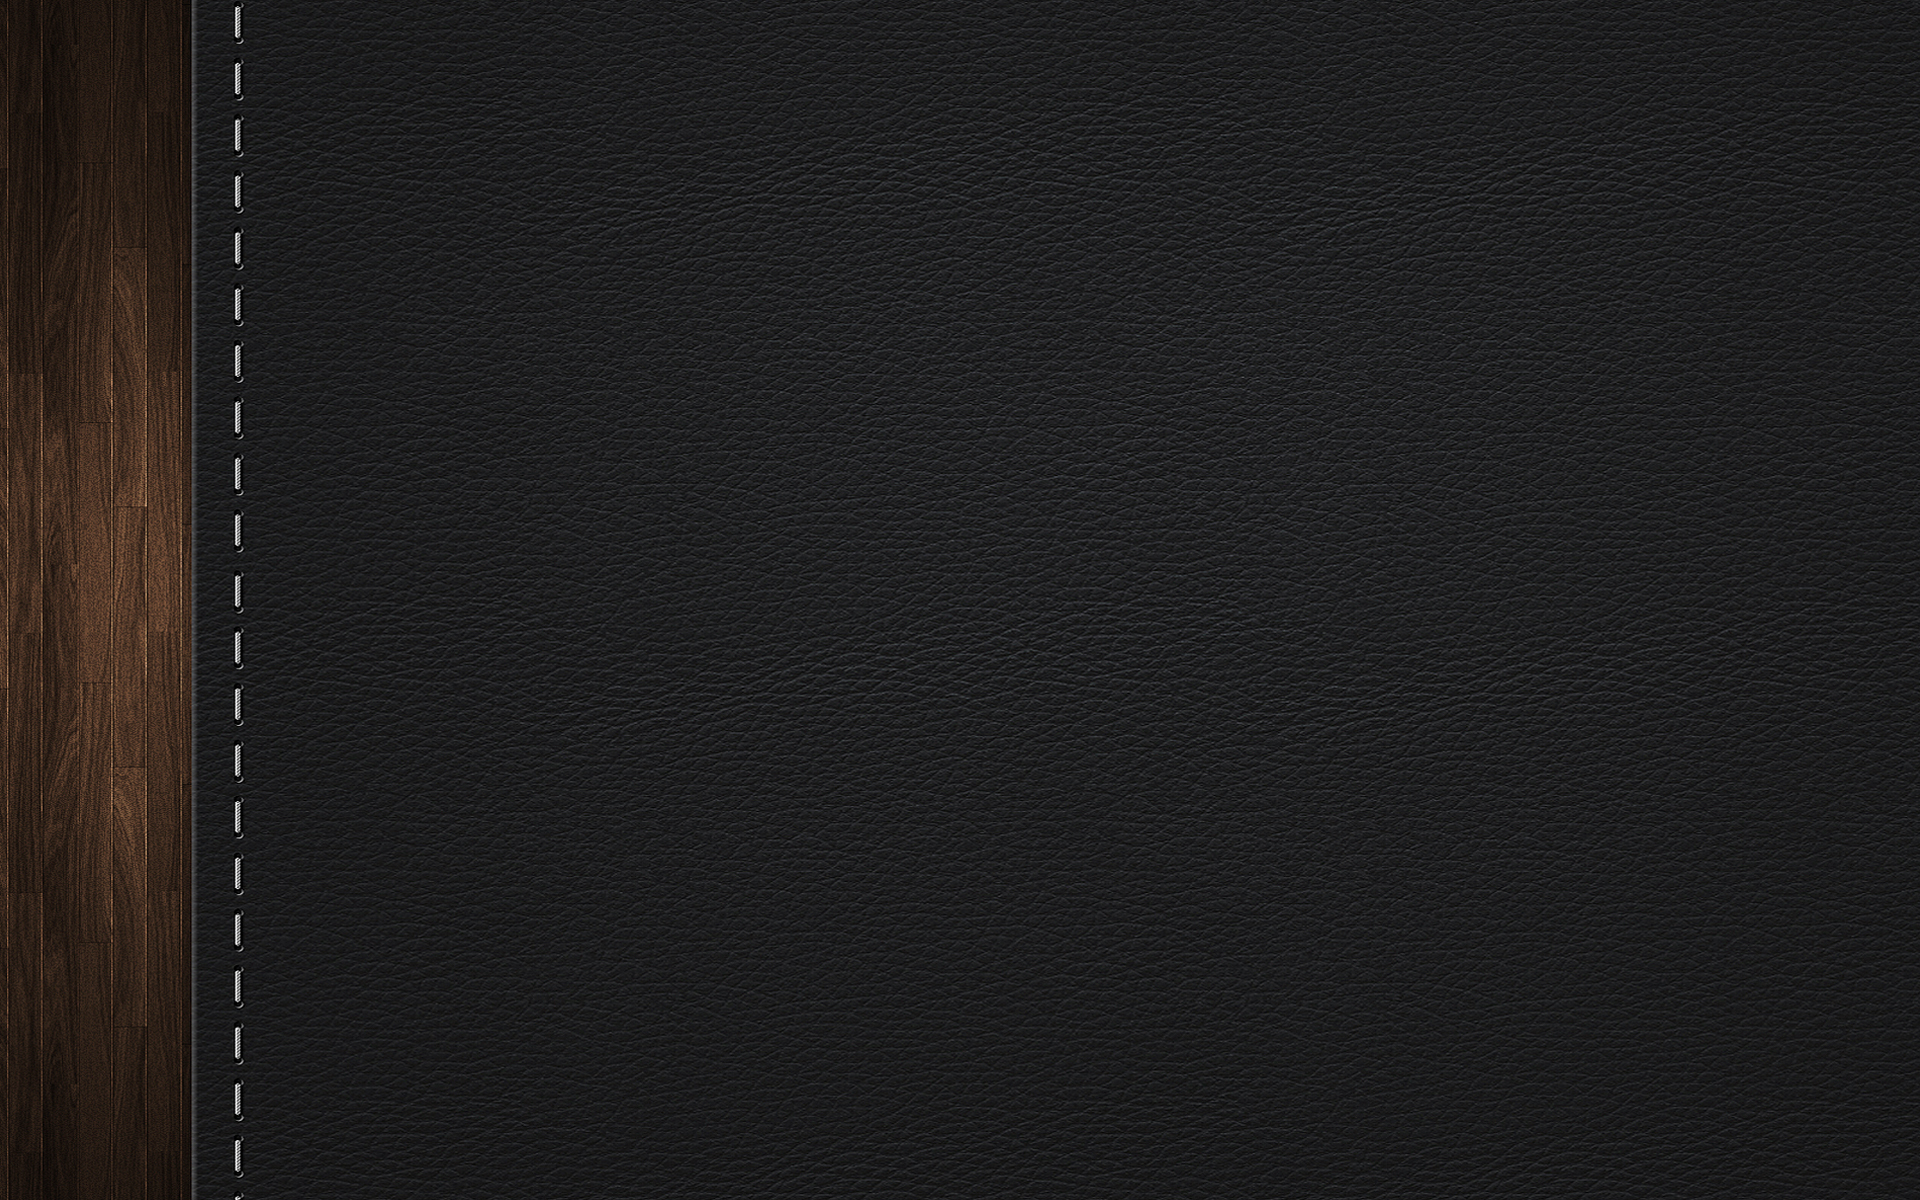 Leather Texture Wallpaper